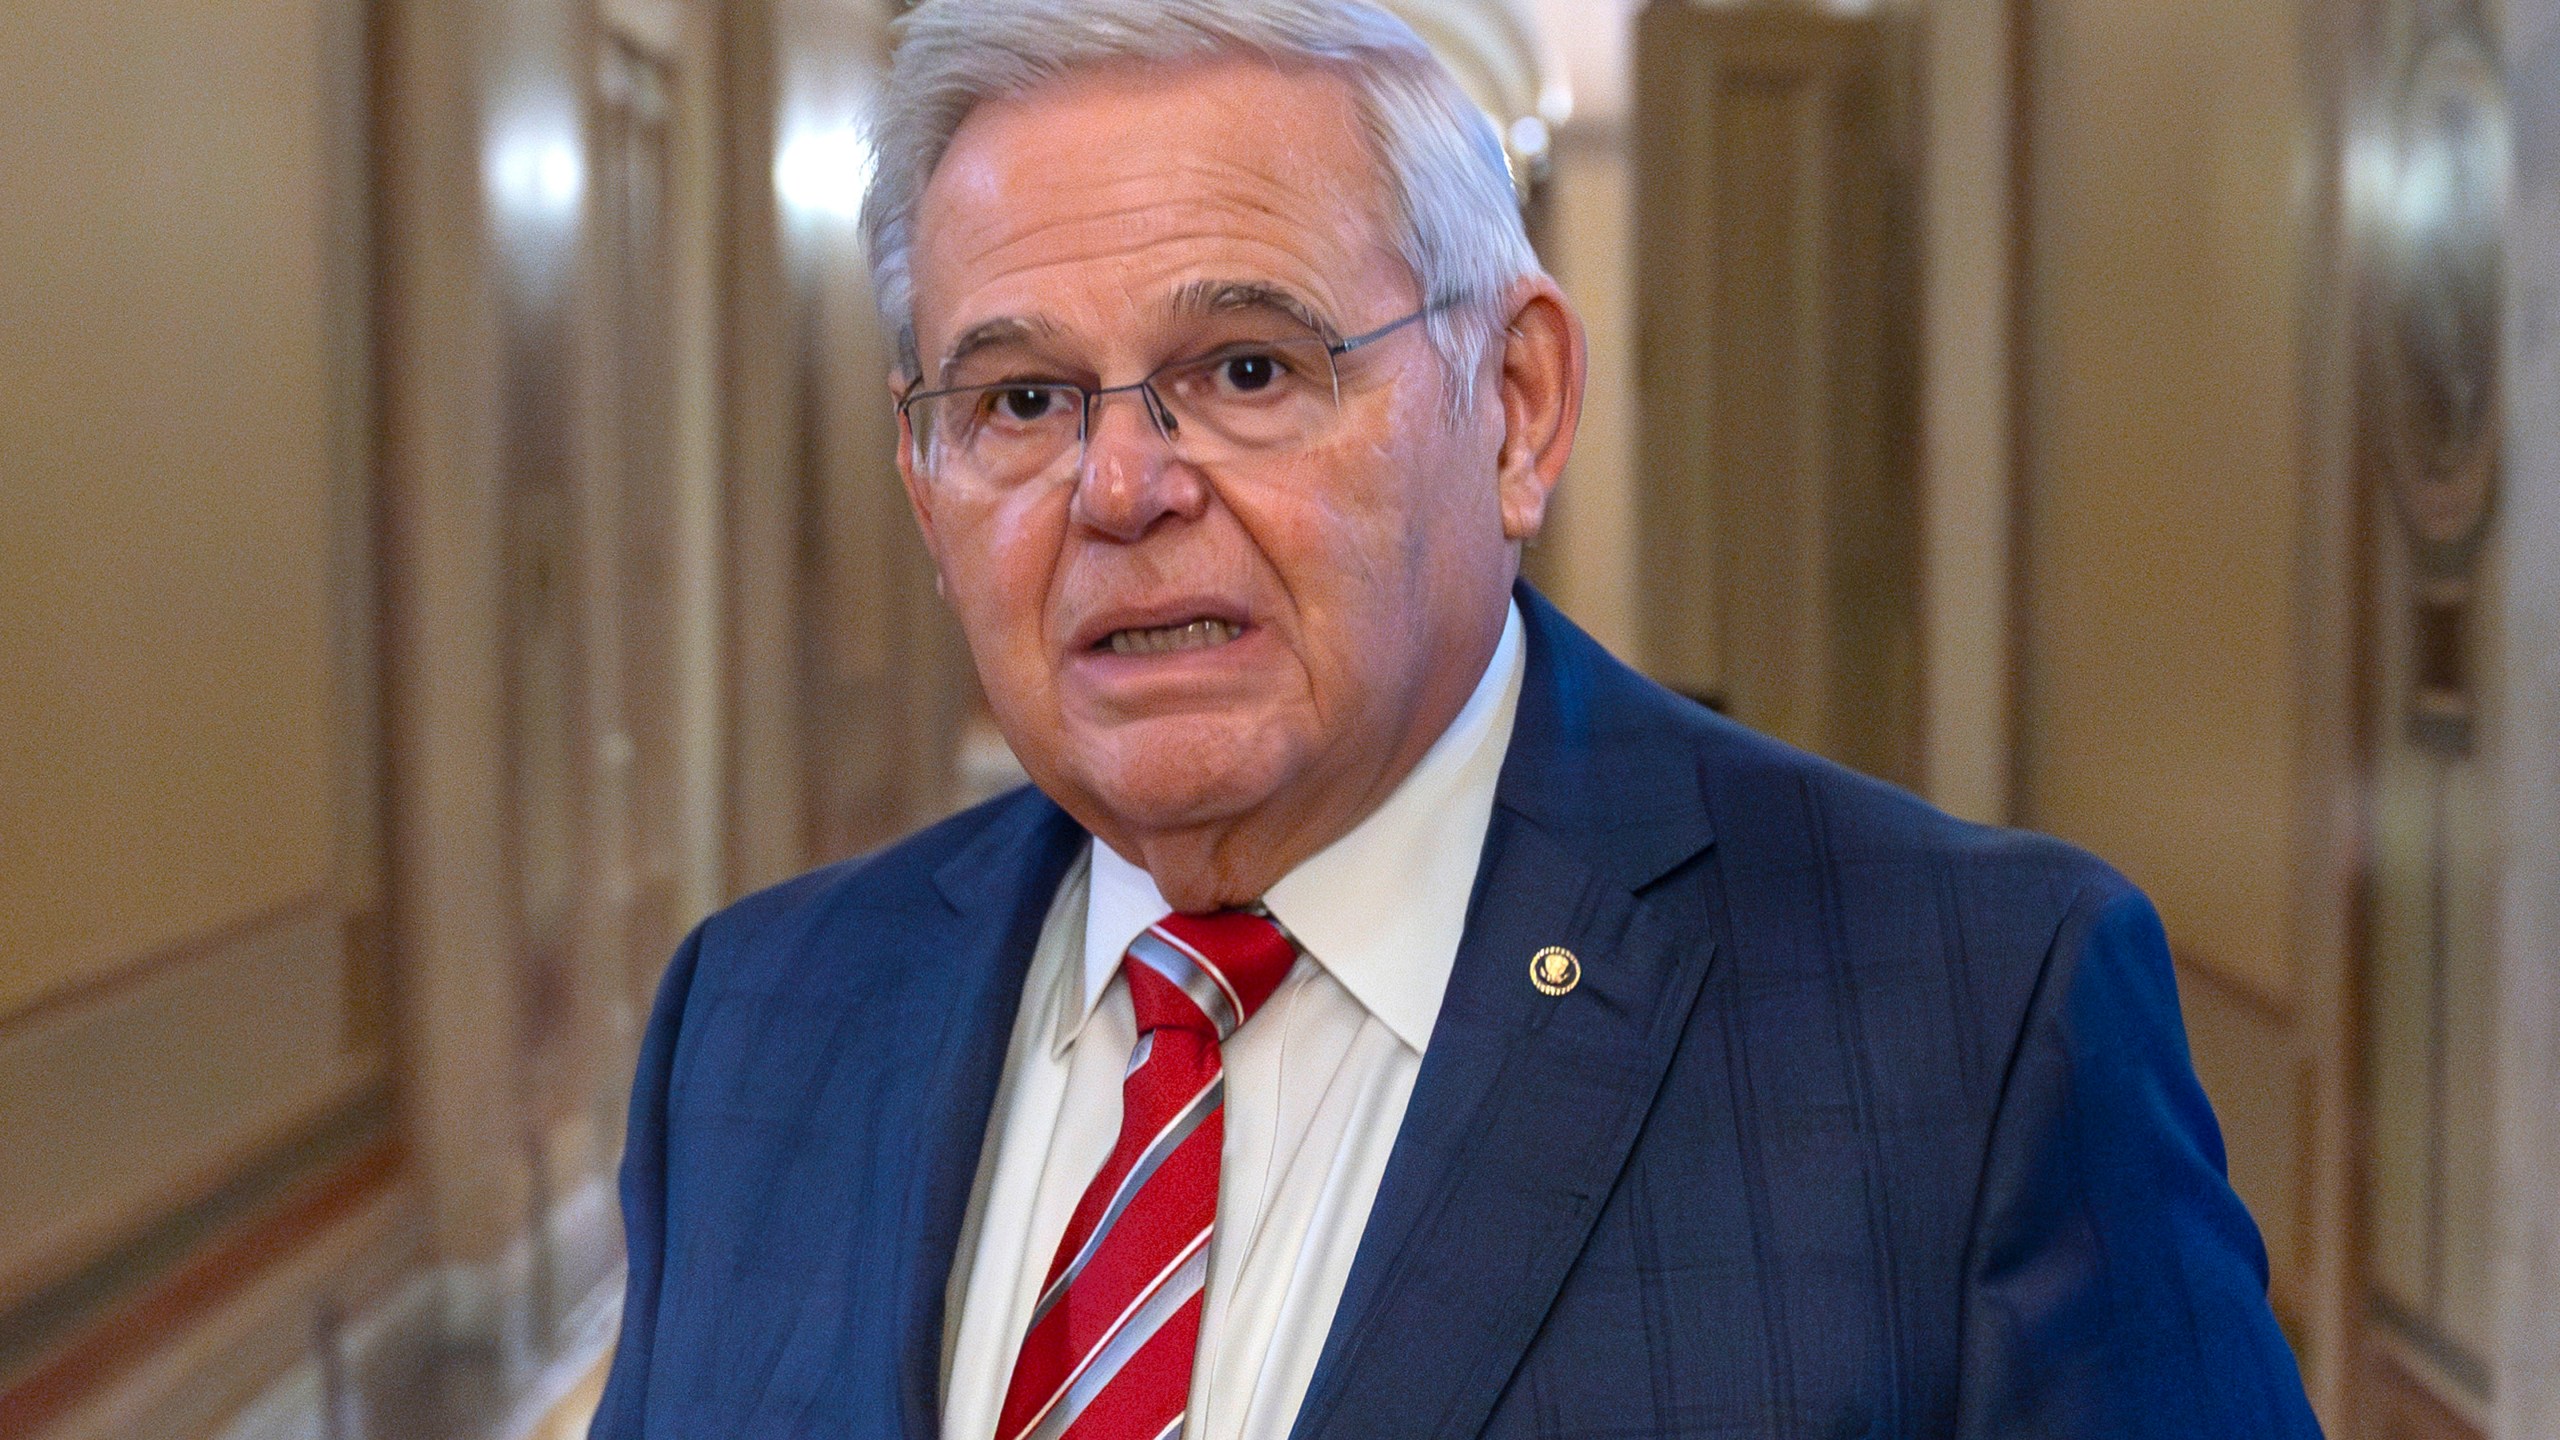 FILE - Sen. Bob Menendez, D-N.J., departs the Senate floor in the Capitol, Sept. 28, 2023, in Washington. Menendez will not seek reelection to a fourth term in the Senate as he faces federal corruption charges and a significant loss in support from the Democratic Party. (AP Photo/Alex Brandon, File)